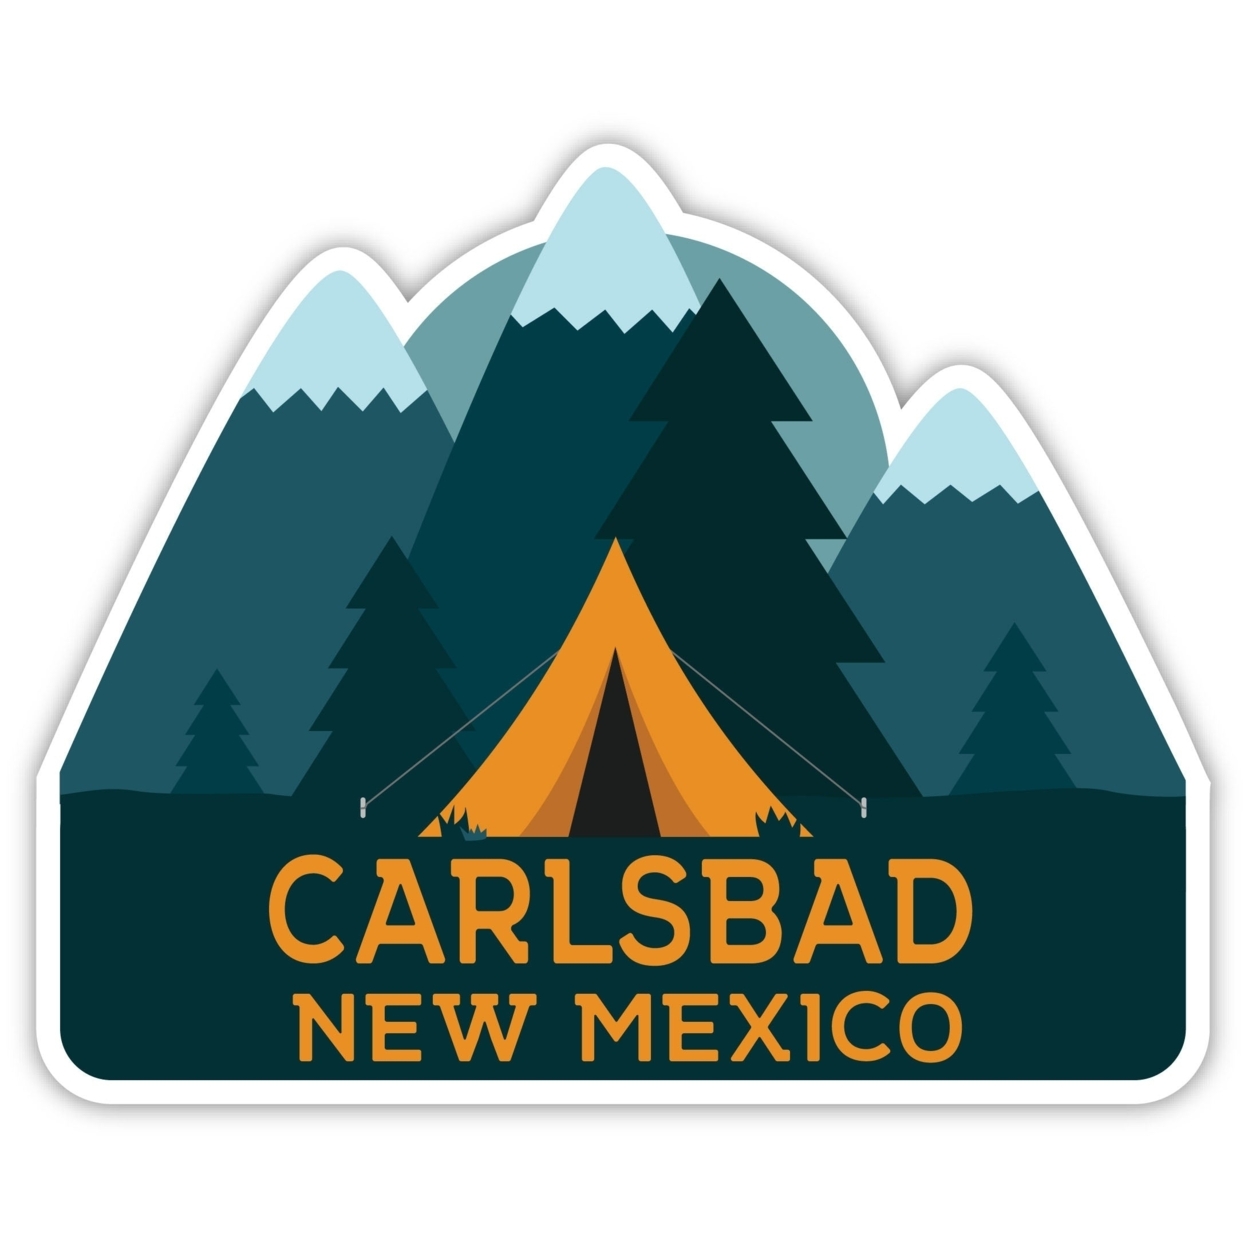 Carlsbad New Mexico Souvenir Decorative Stickers (Choose Theme And Size) - 4-Pack, 2-Inch, Tent